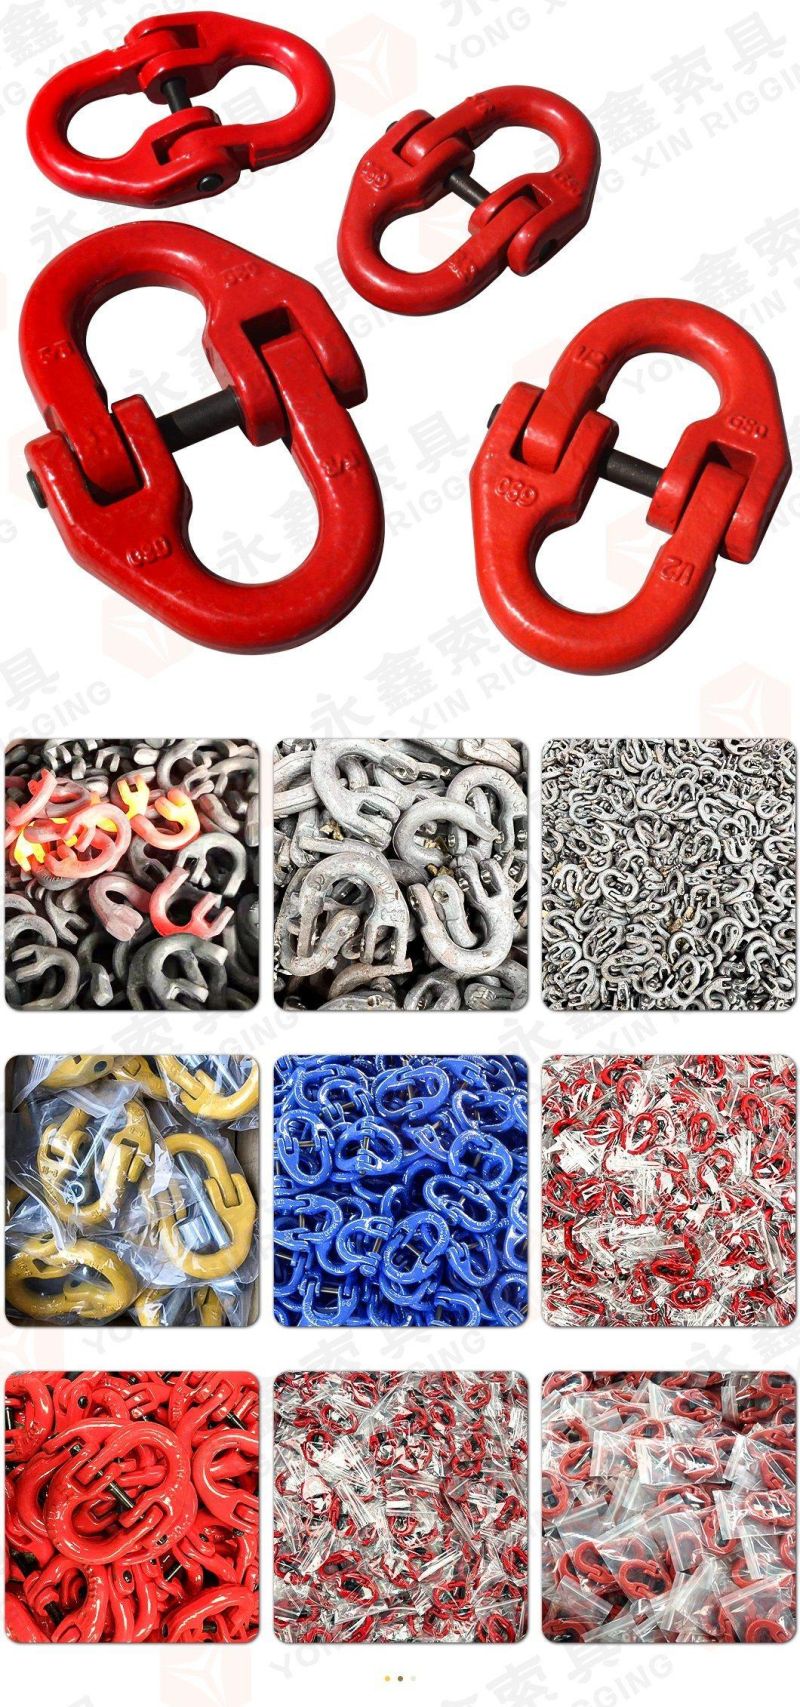 European Type G80 Anchor Chain Coupling Hardware Rigging Forge Steel Connecting Link